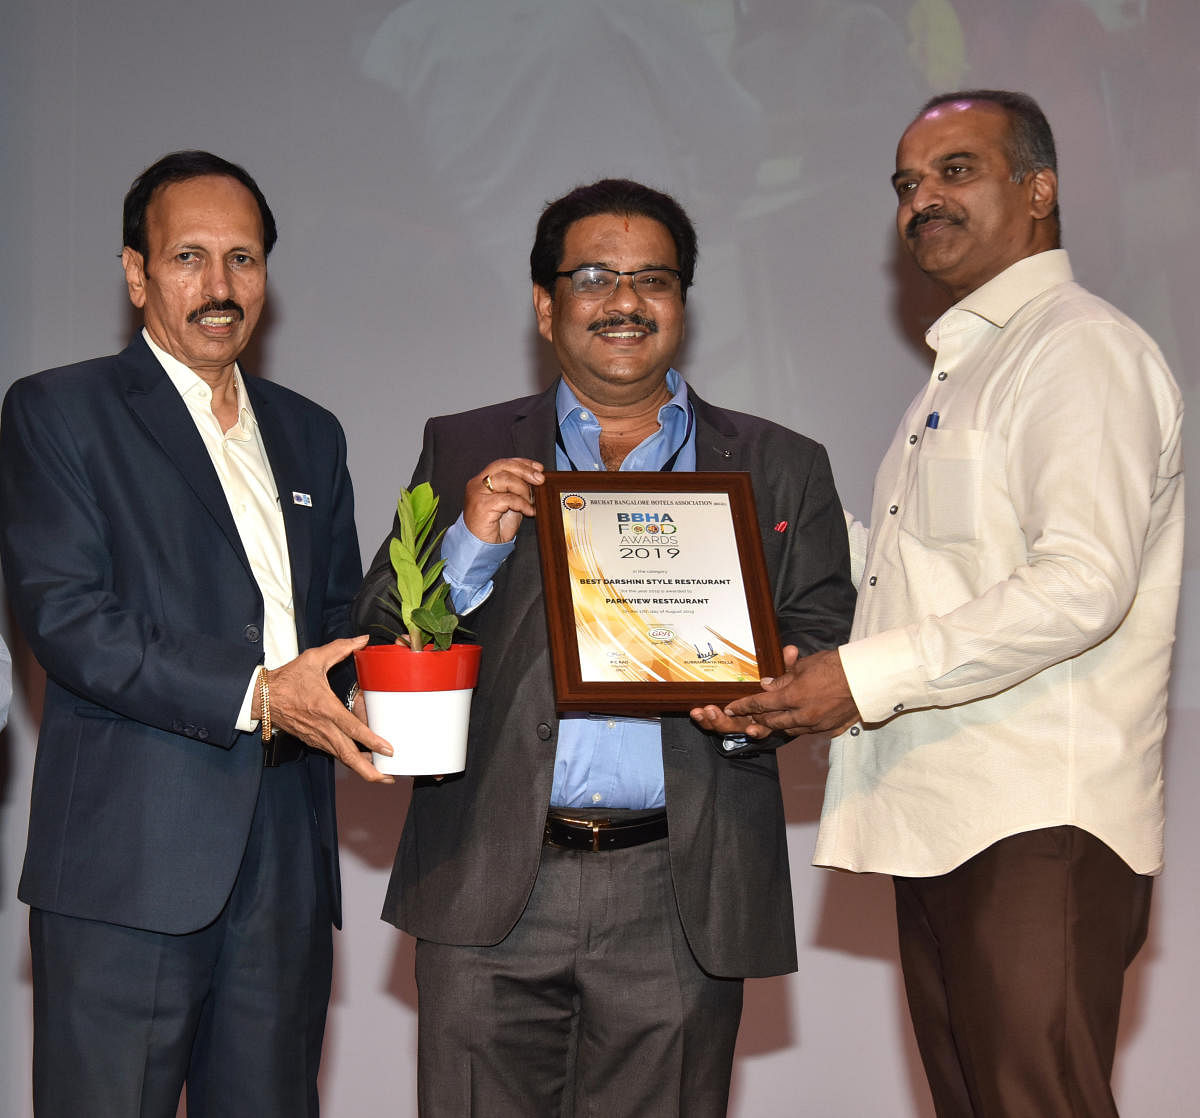 Bangalore Central parliamentarian P C Mohan presents the 'Best Darshini' award to Narasimhamurthy of Parkview Hotel at an awards ceremony hosted by the Bruhat Bangalore Hotel Association (BBHA) on Saturday. BBHA Chairman P C Road is present. DH PHOTO/MANJ